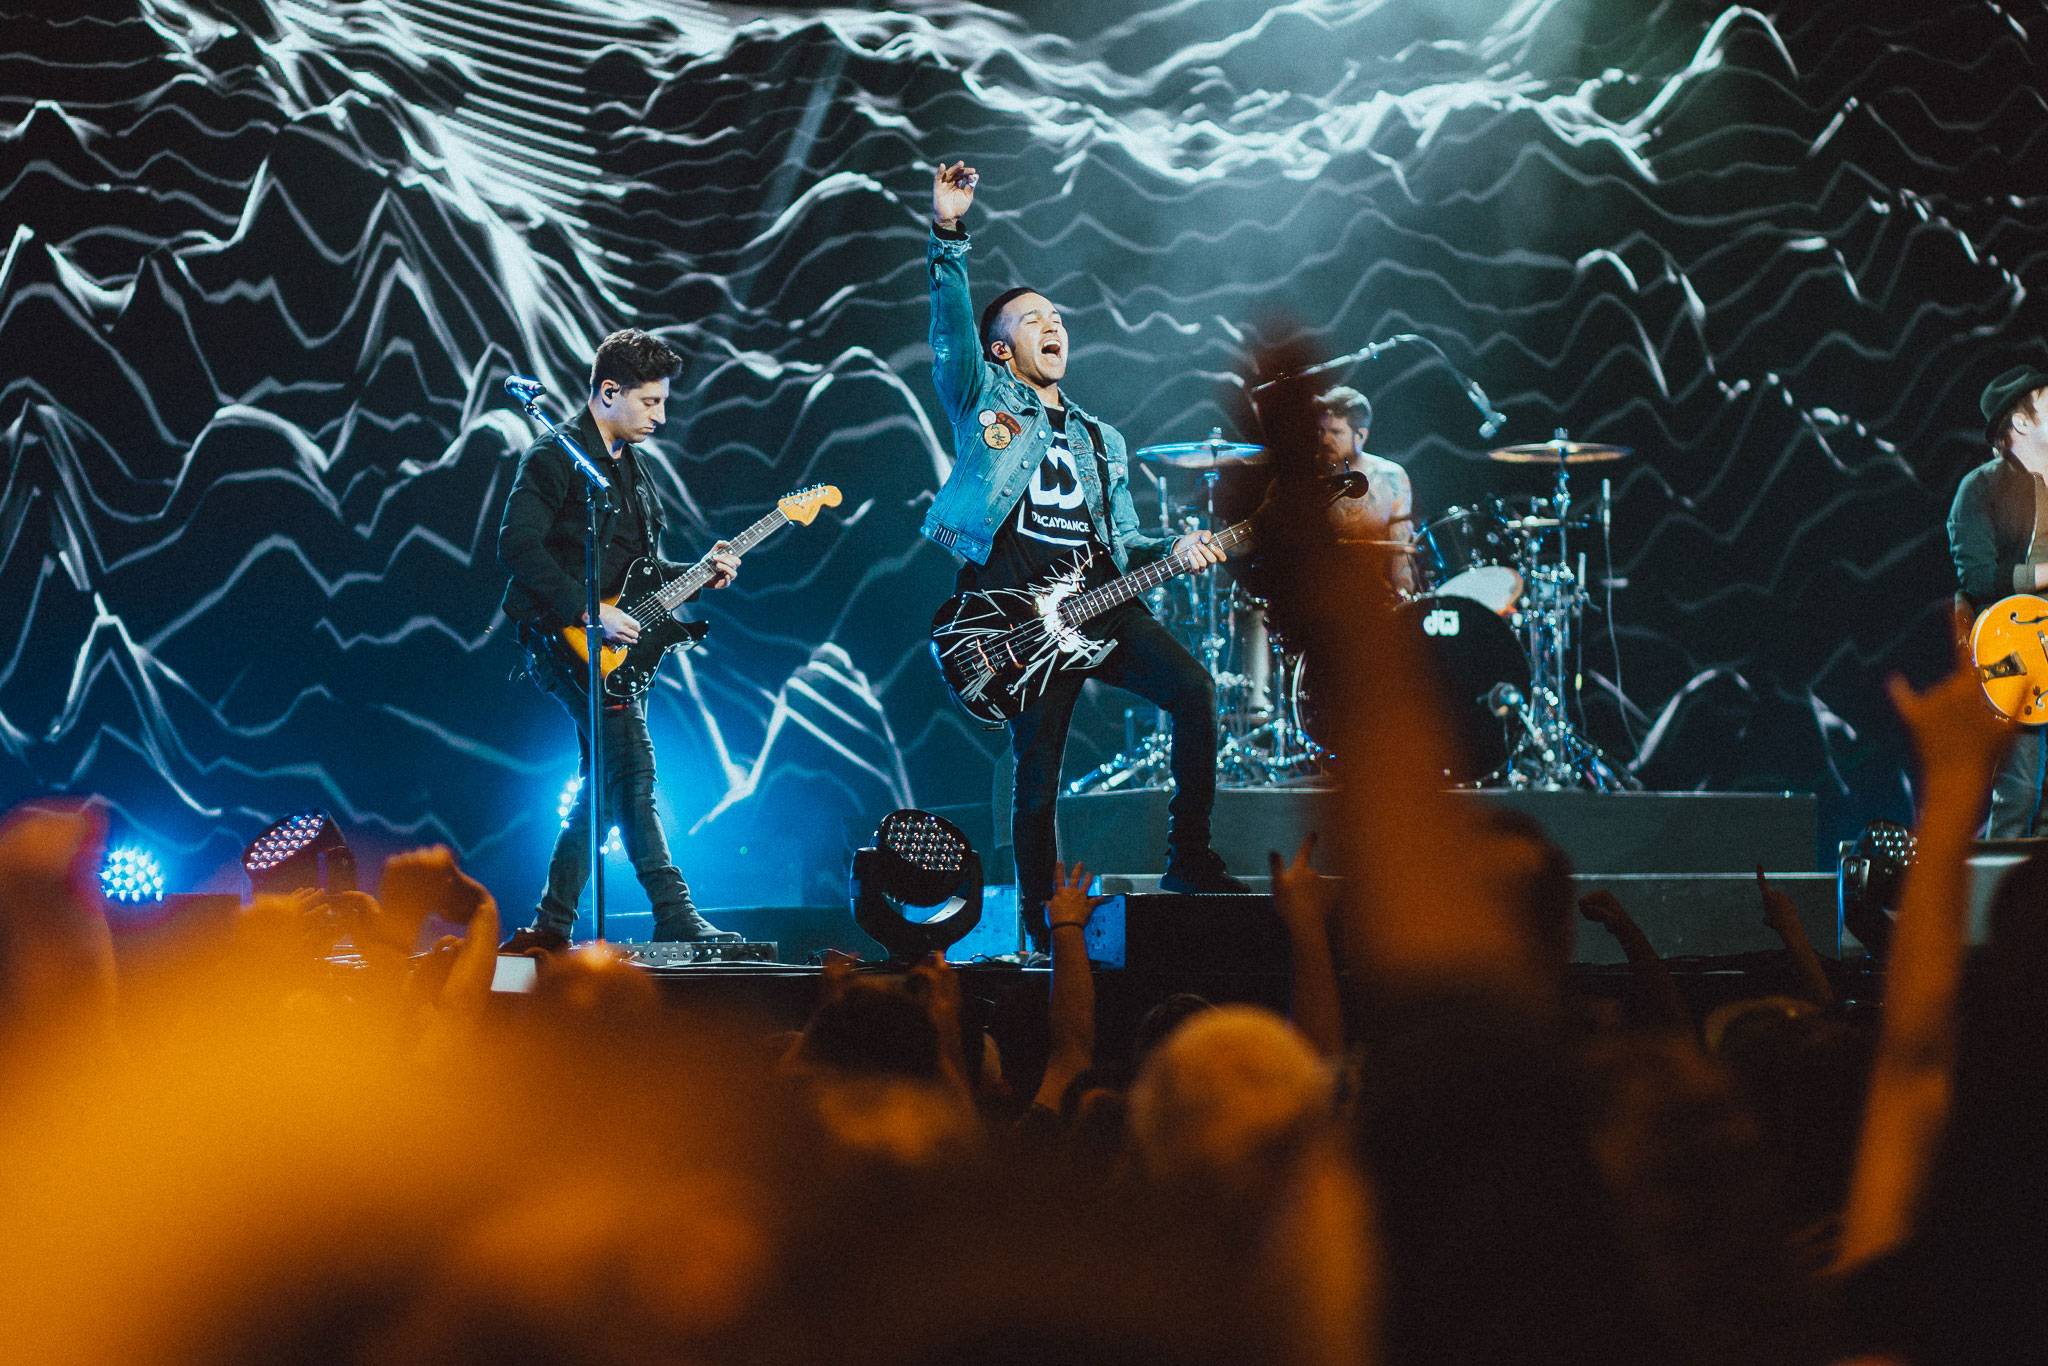 FALL OUT BOY: MANIA TOUR Live in Shenzhen